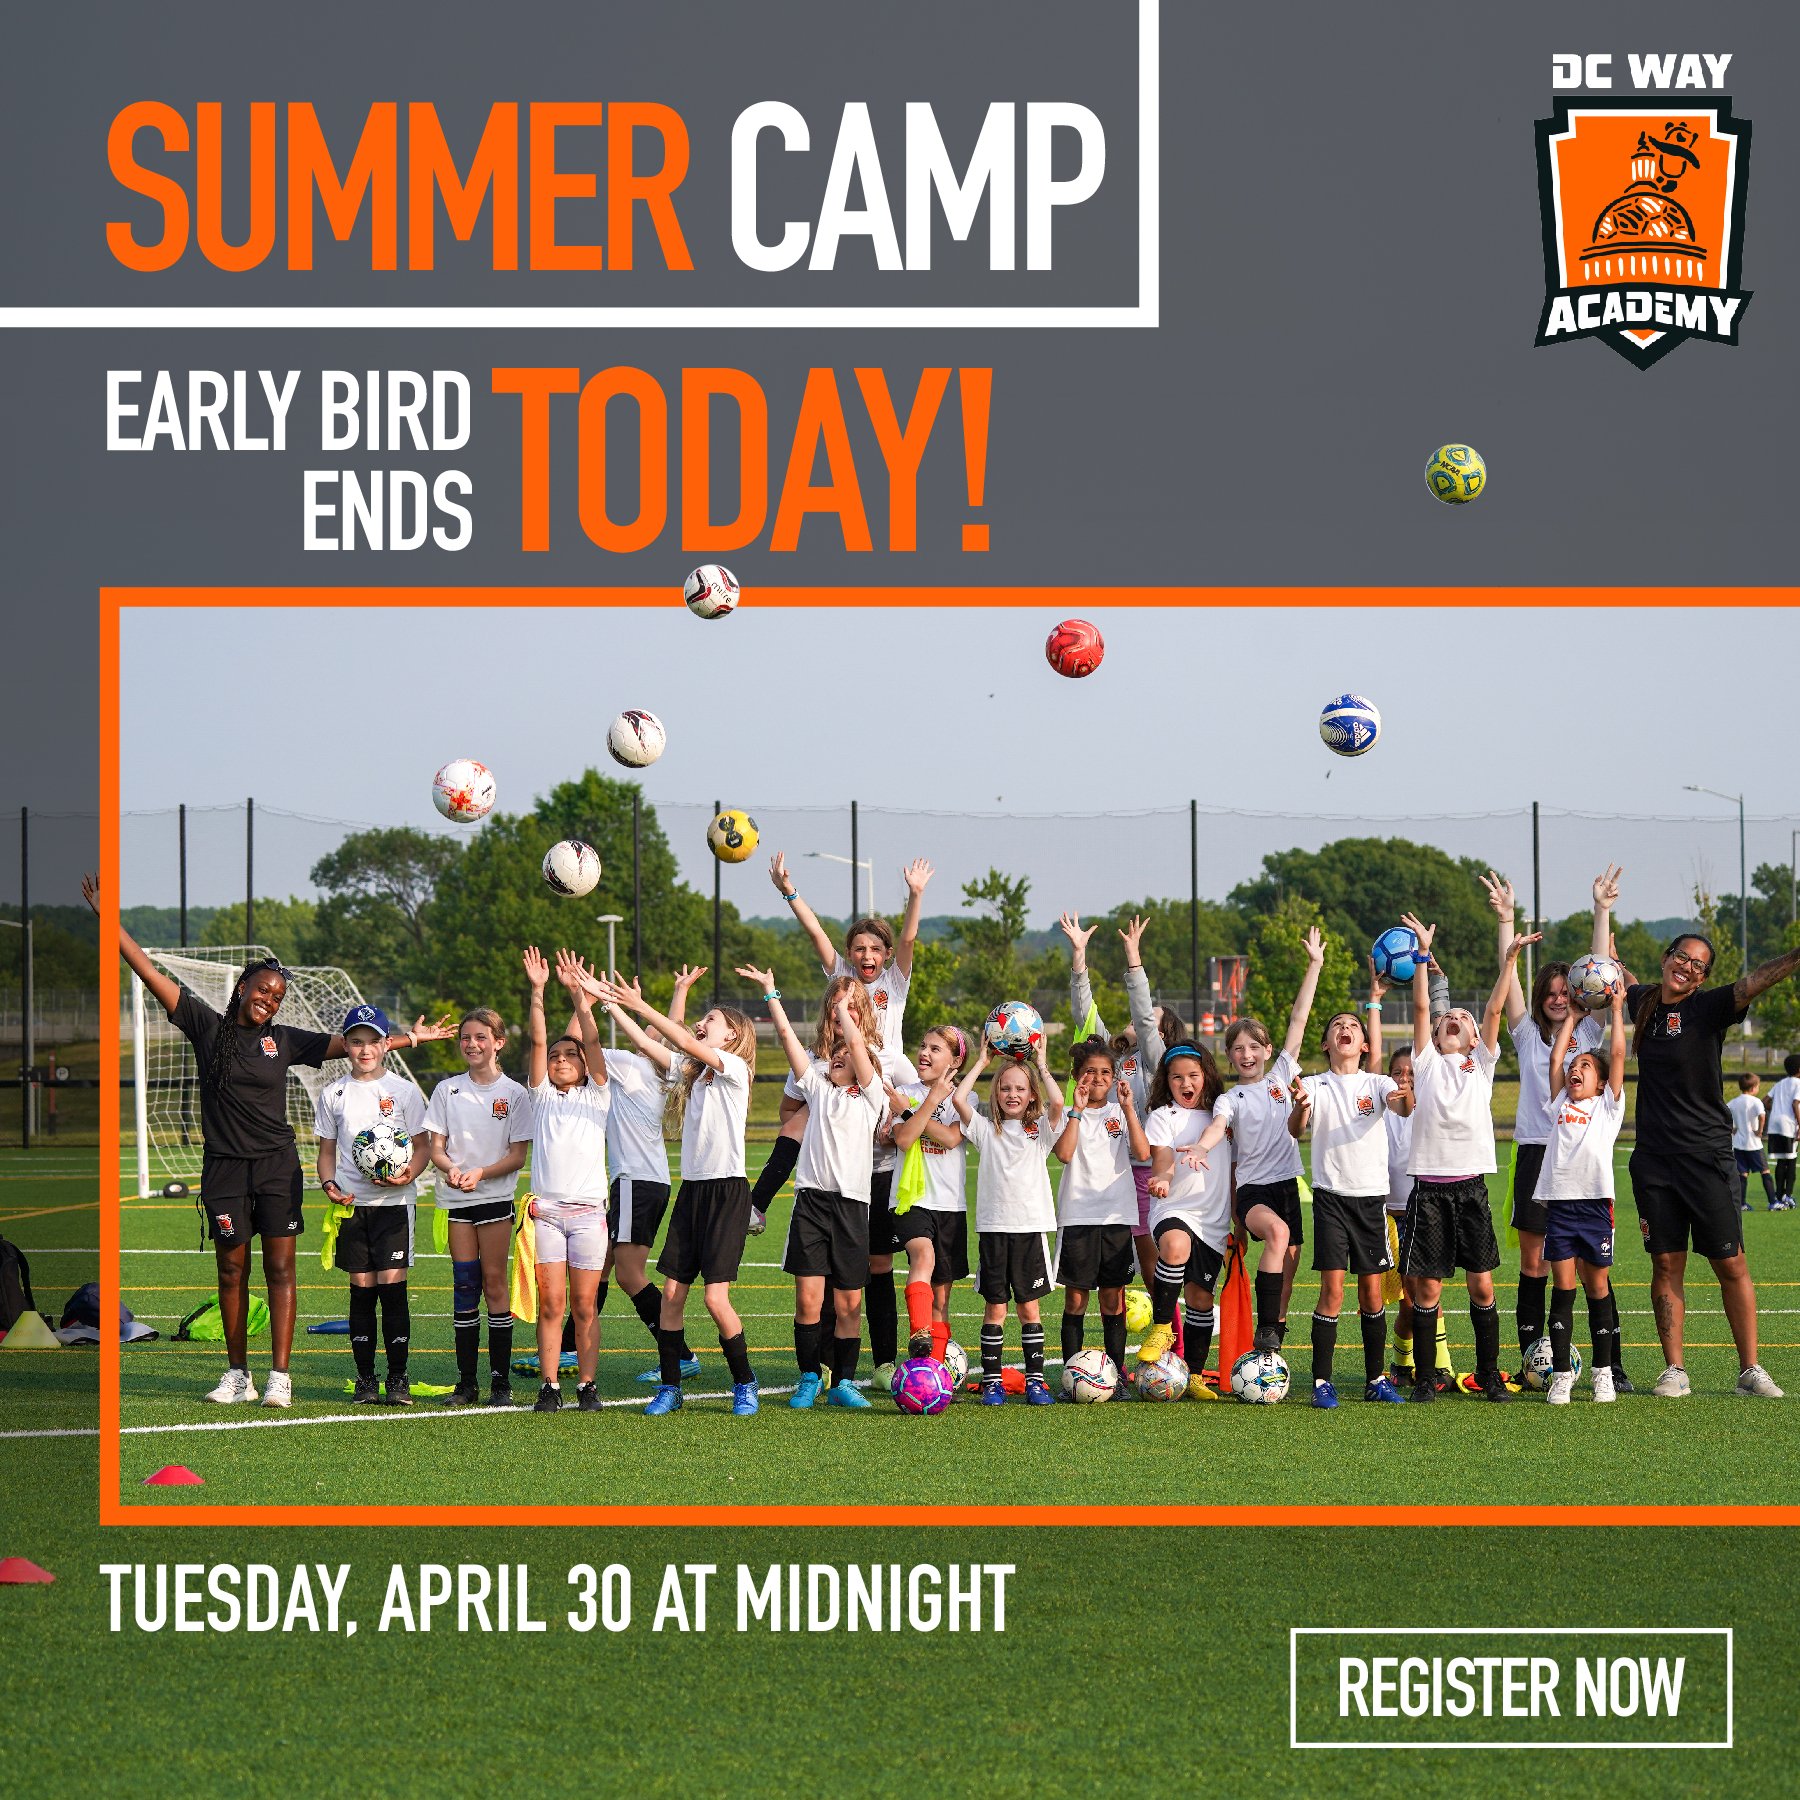 Last Chance Alert! 🐦 Our Summer Camp Early Bird Special expires TODAY at midnight! 🚨 Don't miss out on exclusive savings &ndash; secure your child's spot now before it's too late! 🌟⚽

👉 Join us now, link in bio. 
 
#DCWayAcademy #SummerCamp #Summ